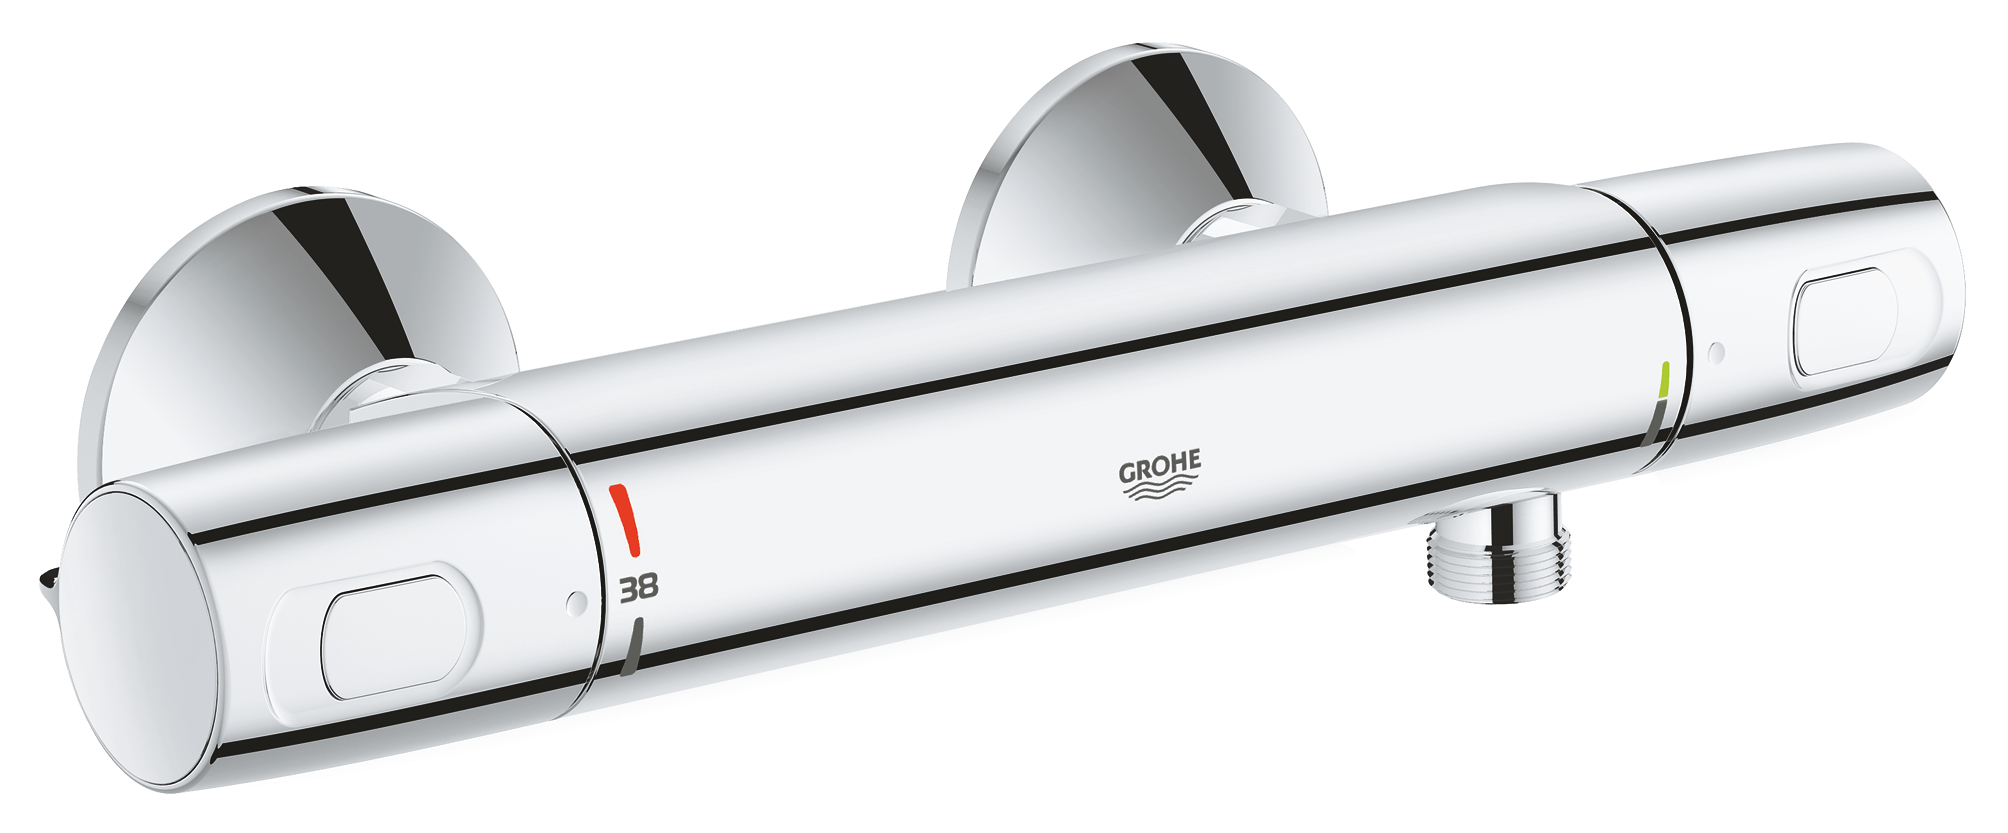 Grohe Brause-Thermostat Precision Trend